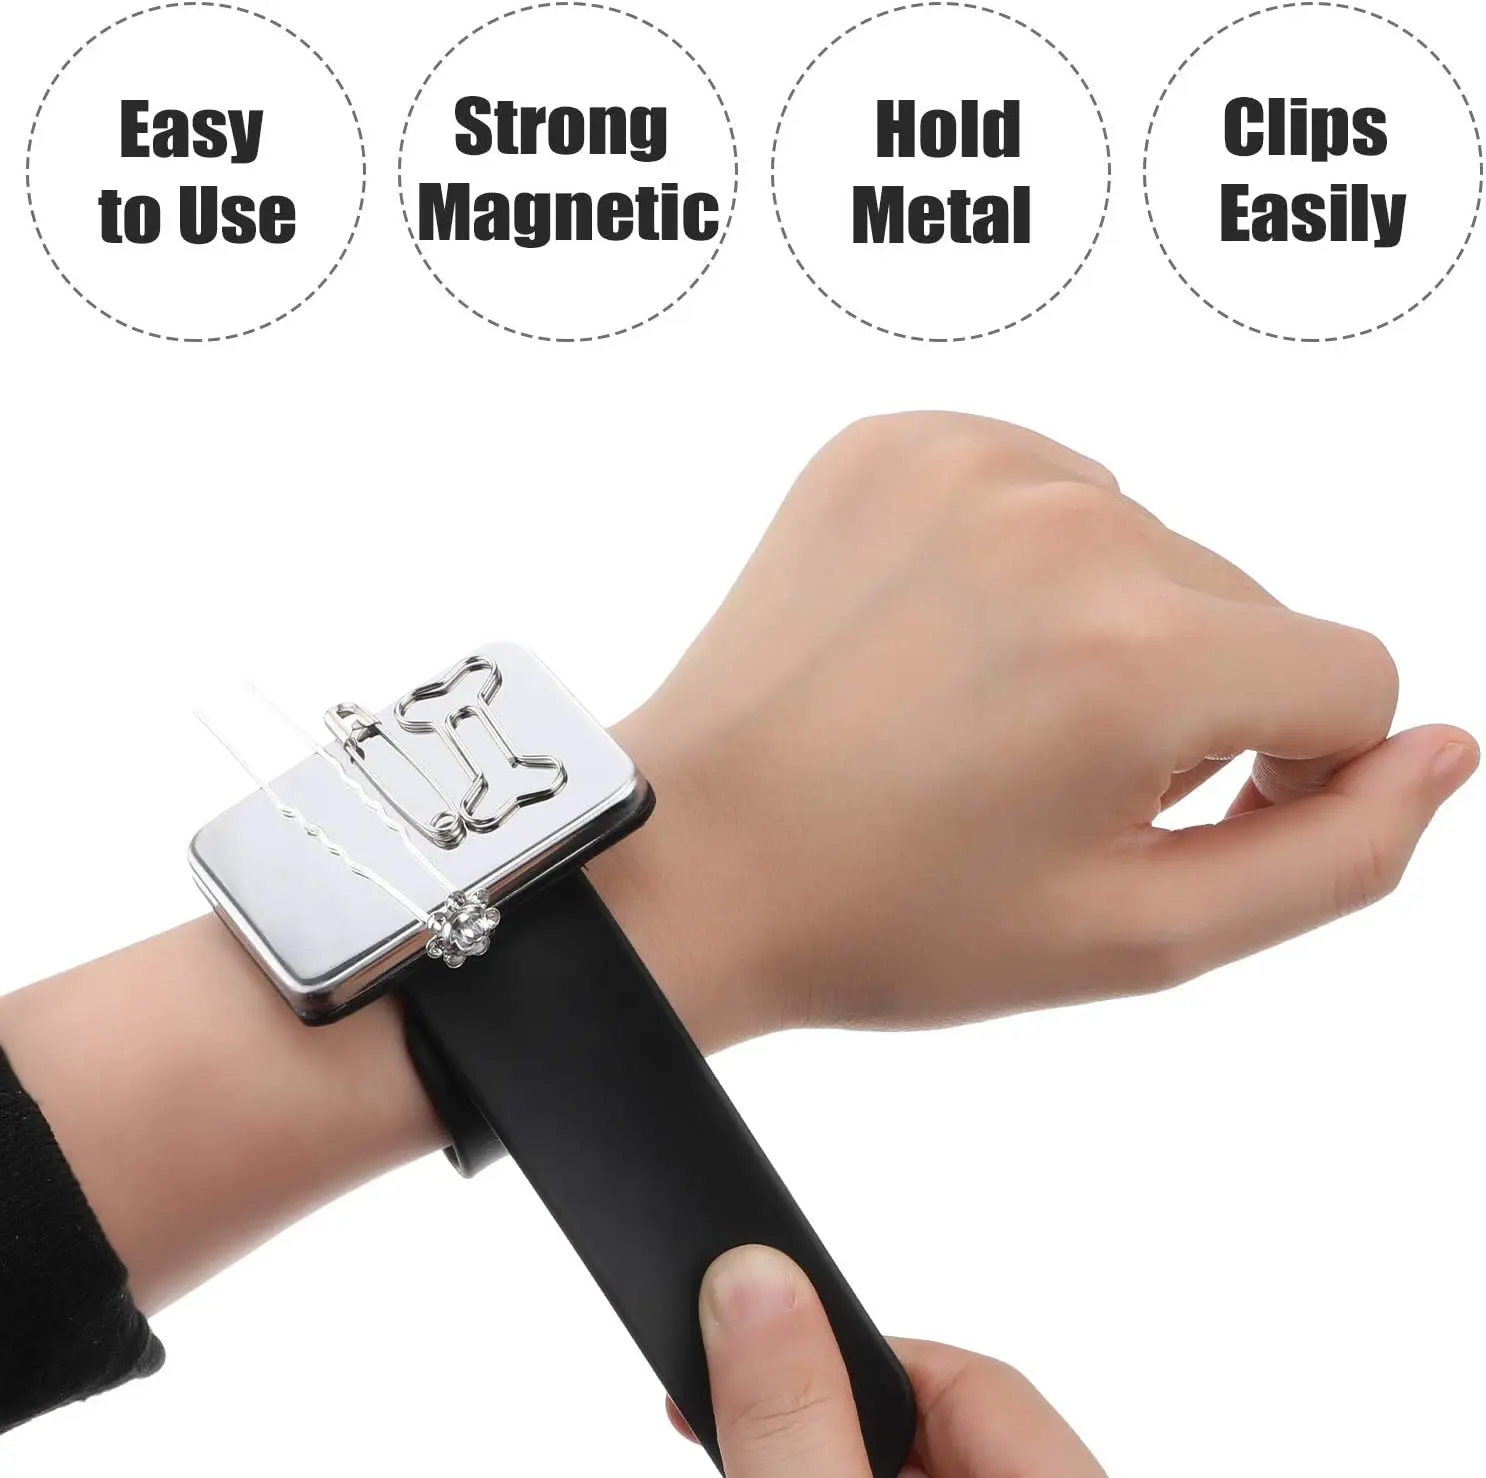 Professional Magnetic Bracelet Wrist Band Strap Salon Hair Accessories Hair Clip Holder Barber Hairdressing Styling Tools silicone magnetic watch band wrist strap replacement for samsung galaxy watch4 classic 46mm watch4 classic 42mm watch4 44mm watch4 40mm grey orange